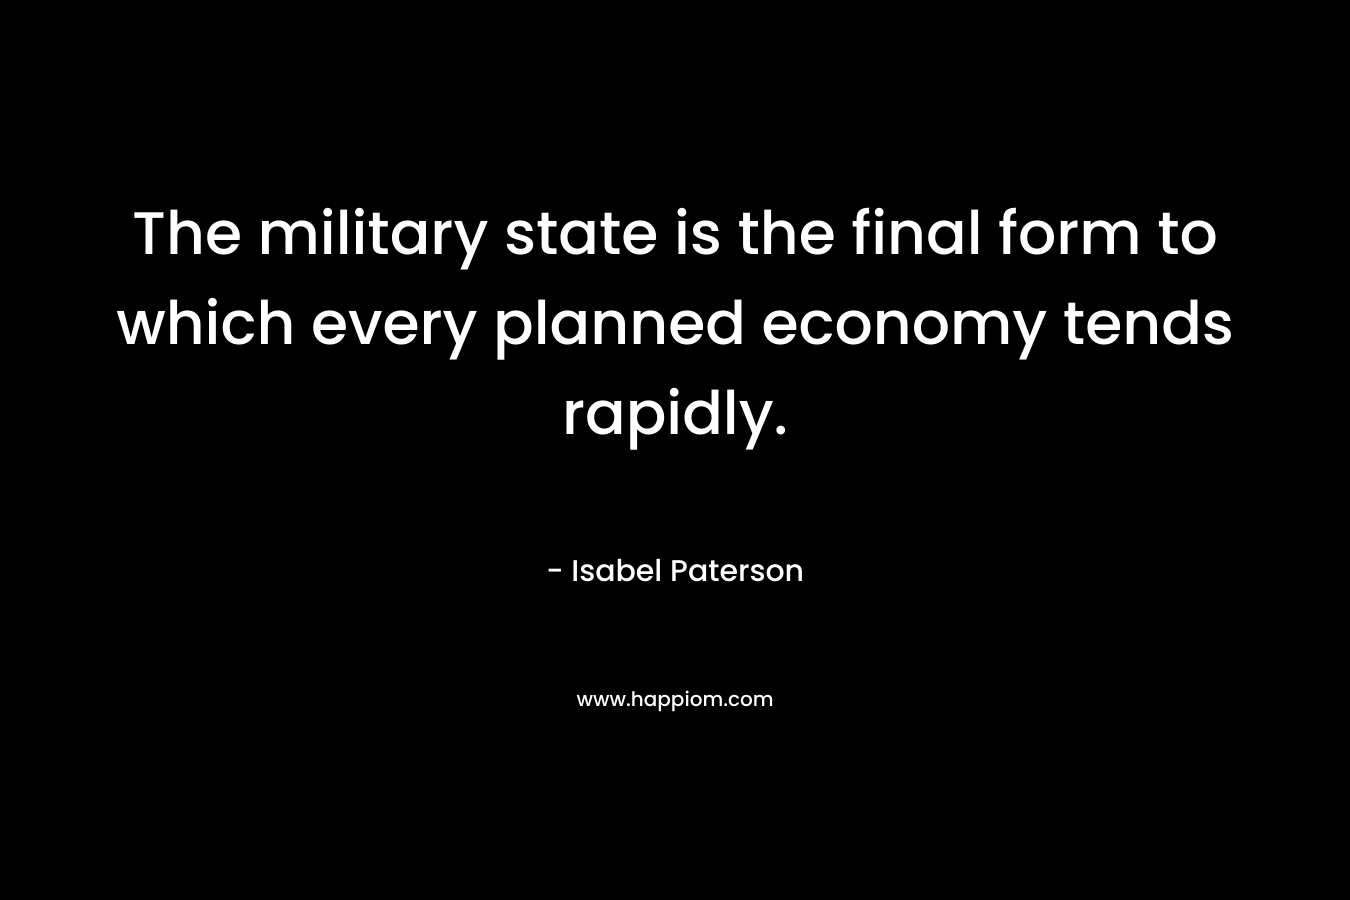 The military state is the final form to which every planned economy tends rapidly. – Isabel Paterson